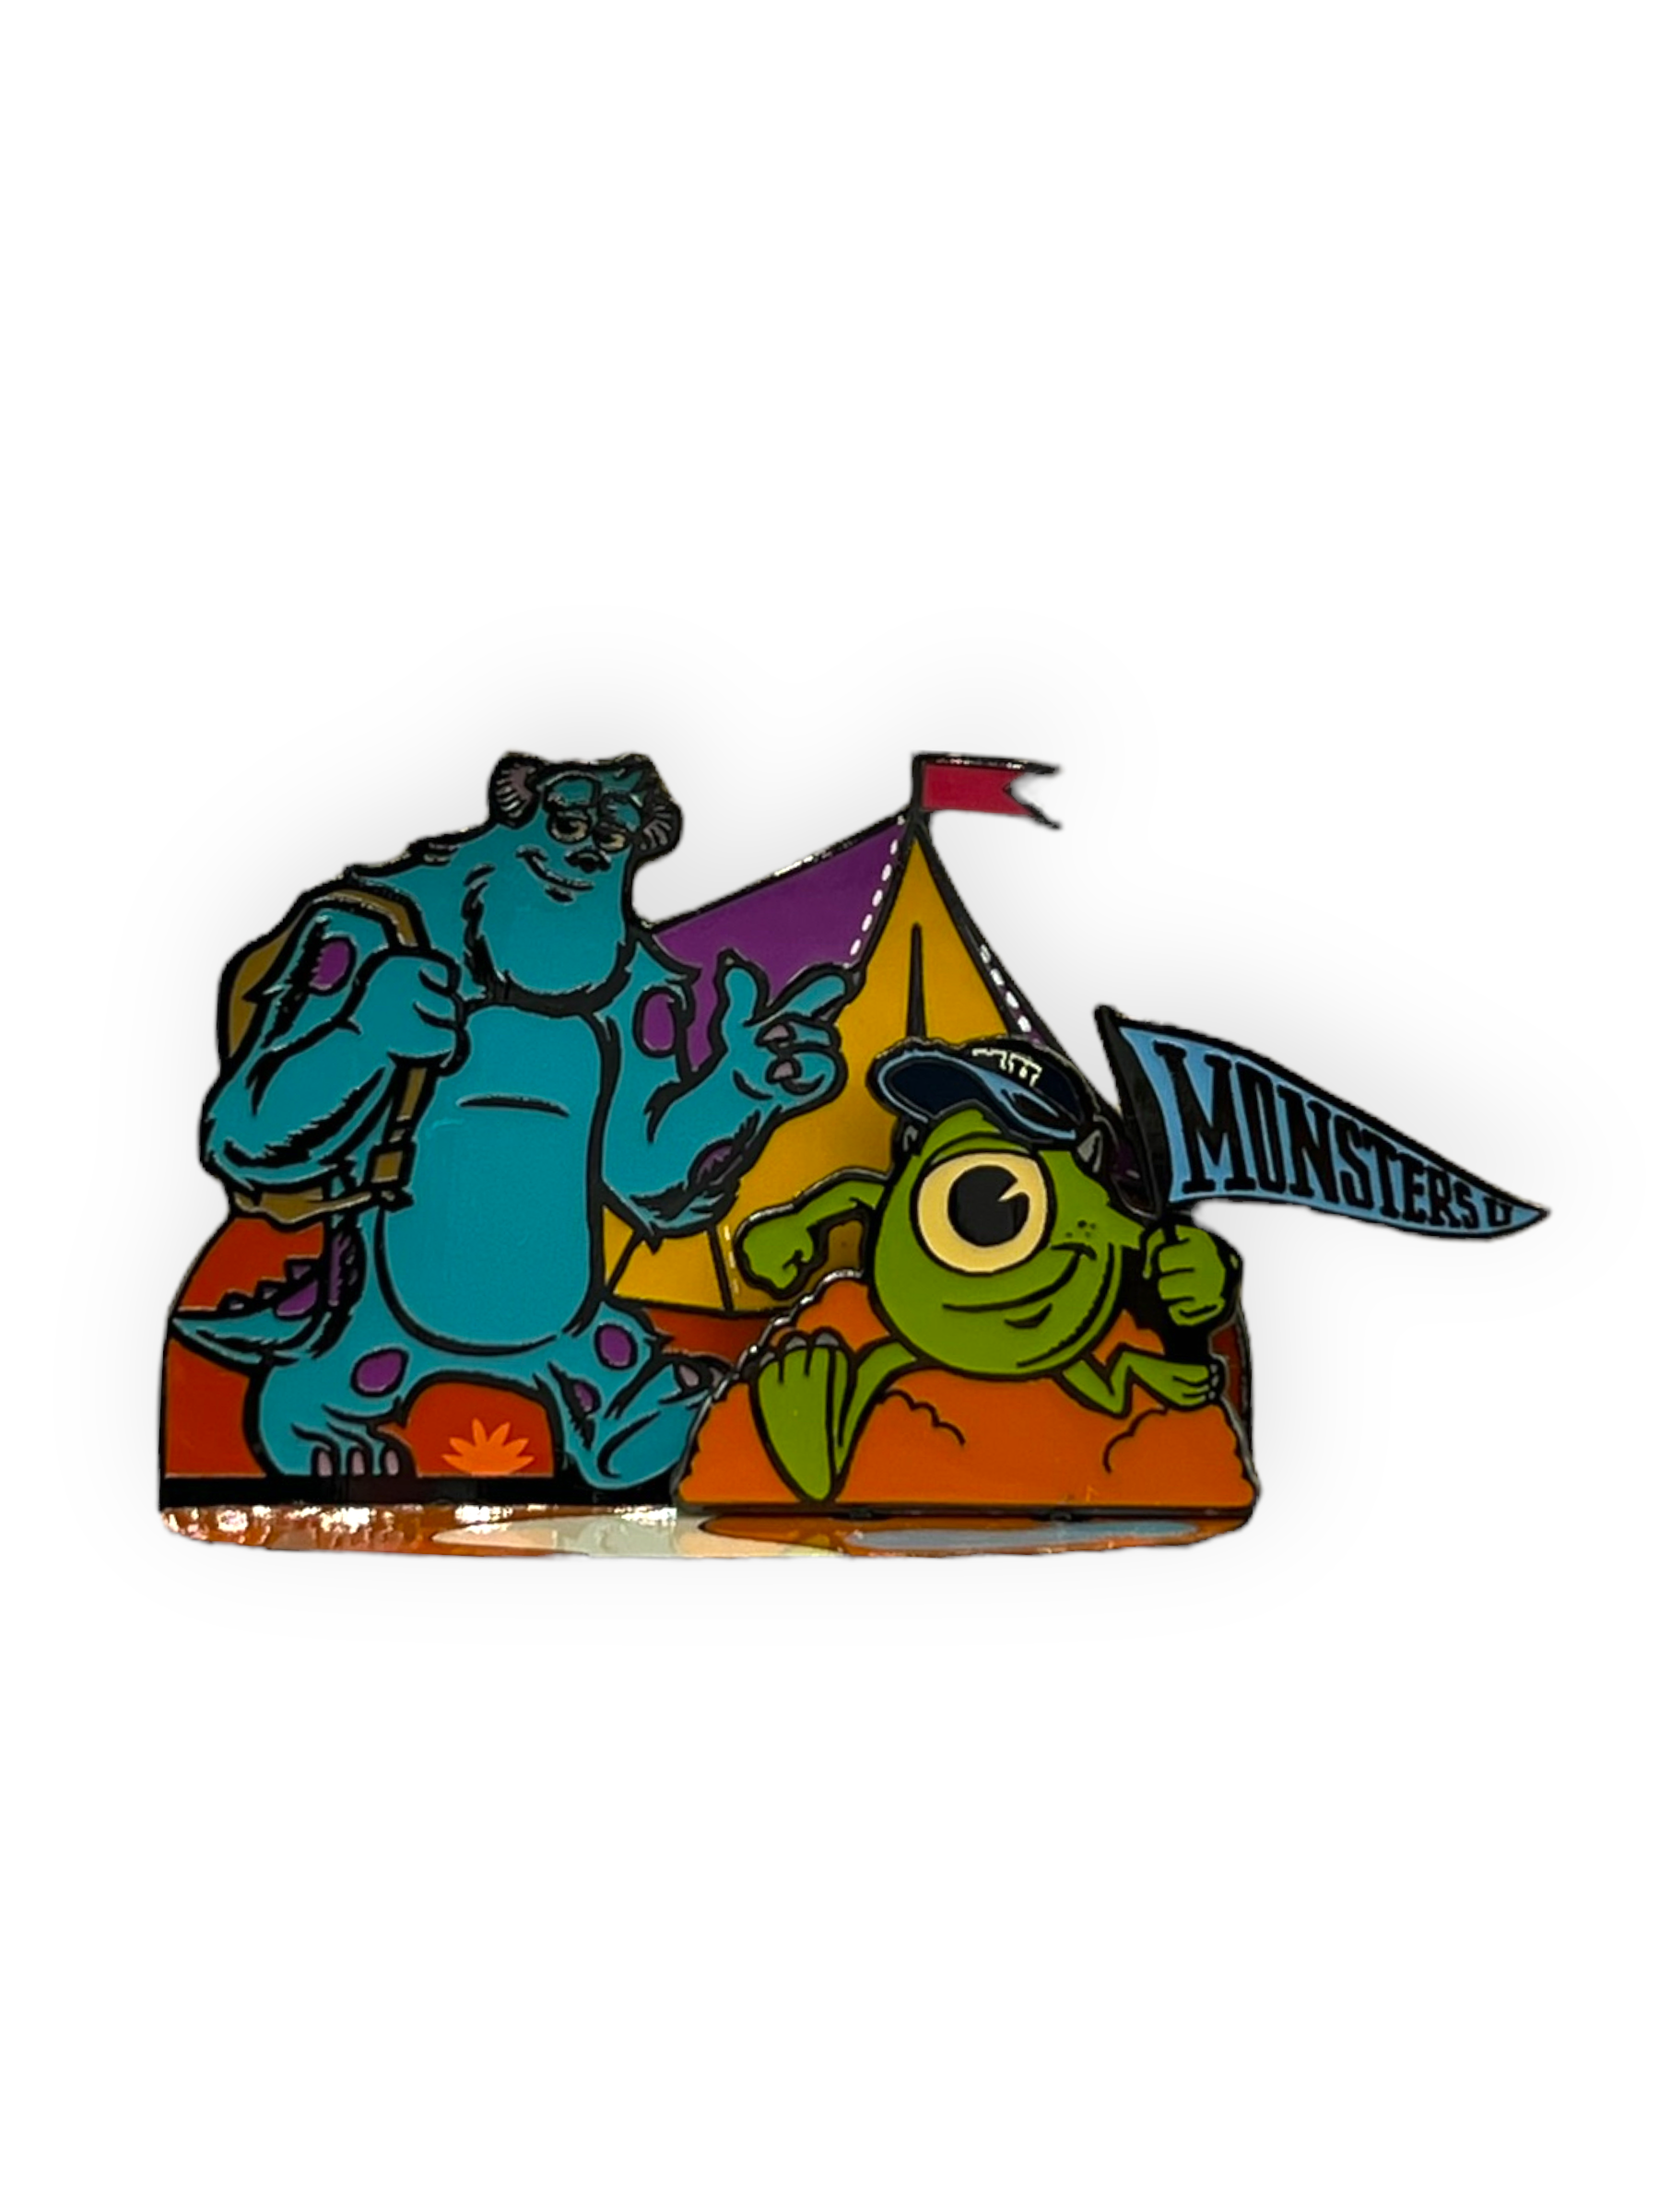 Pin Trading Carnival 2022 Mike and Sulley Diorama Pin